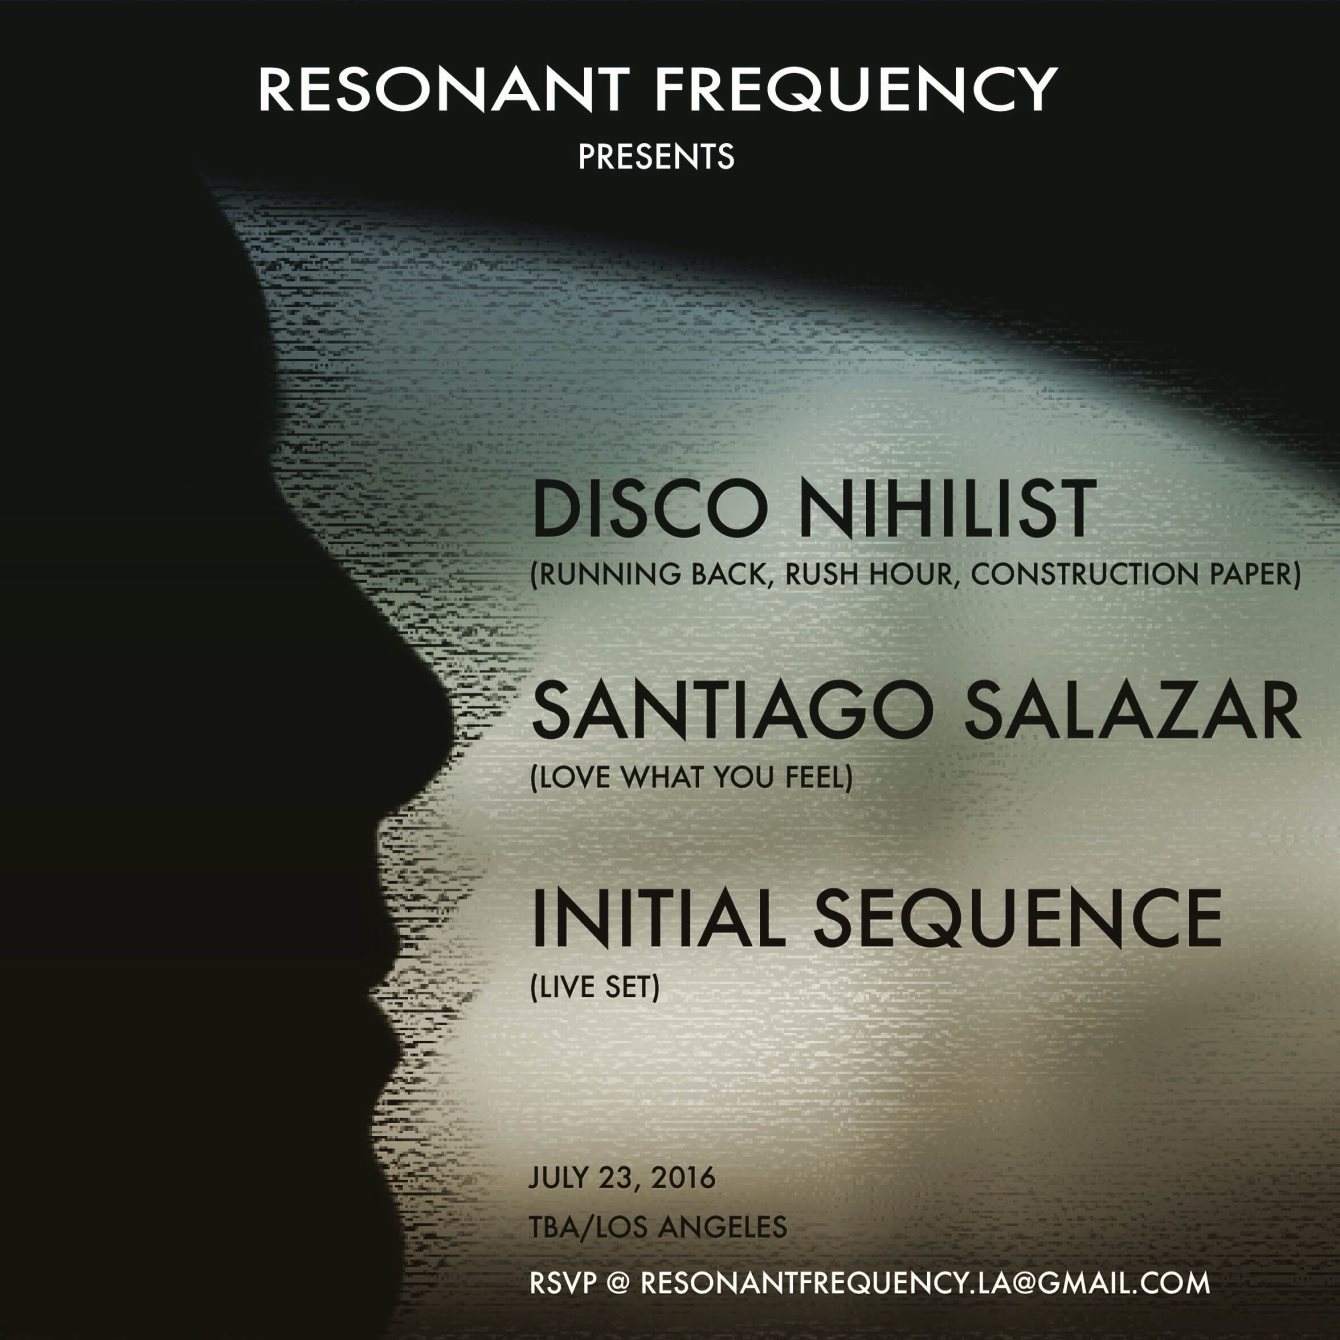 Resonant Frequency Feat. Disco Nihilist, Santiago Salazar, and Initial Sequence (Live) - フライヤー表